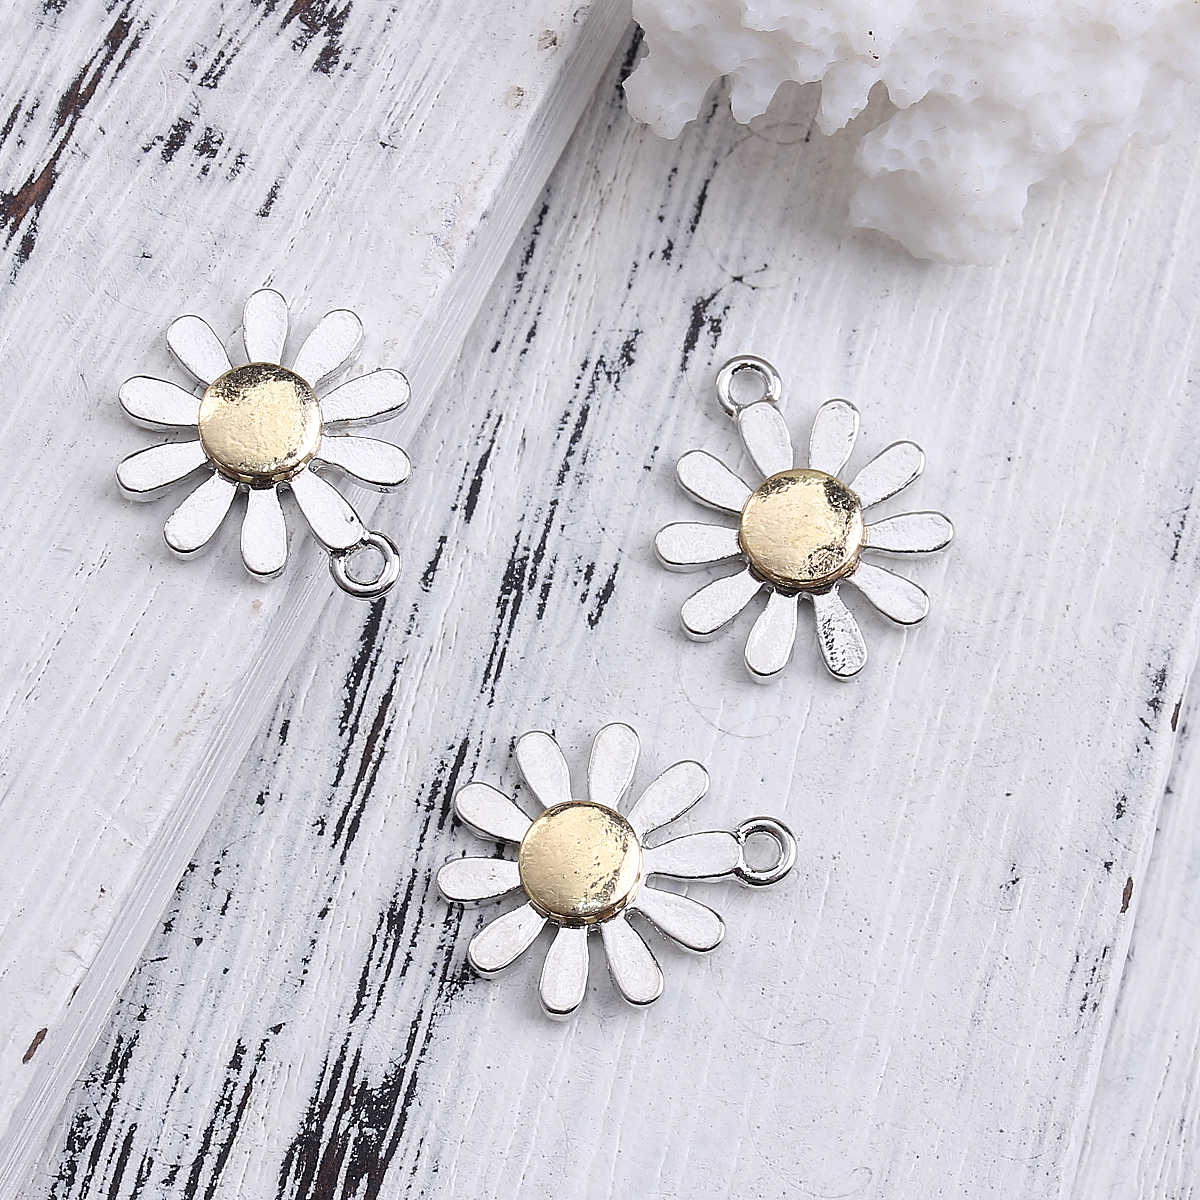 Picture of Zinc Based Alloy Charms Daisy Flower Gold Plated Silver Tone 18mm( 6/8") x 15mm( 5/8"), 5 PCs